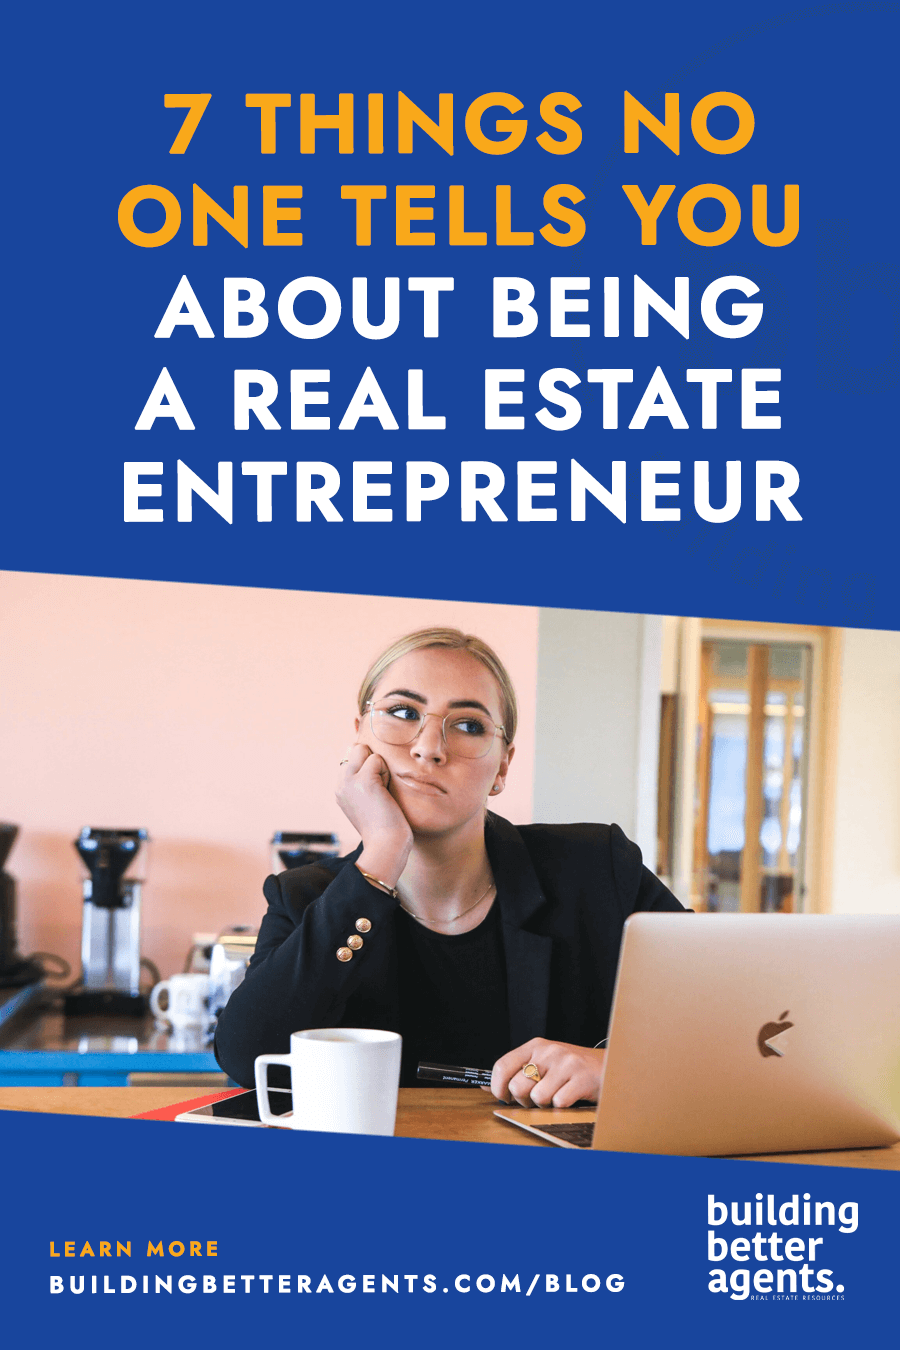 7 Things No One Tells You About Being a Real Estate Entrepreneur